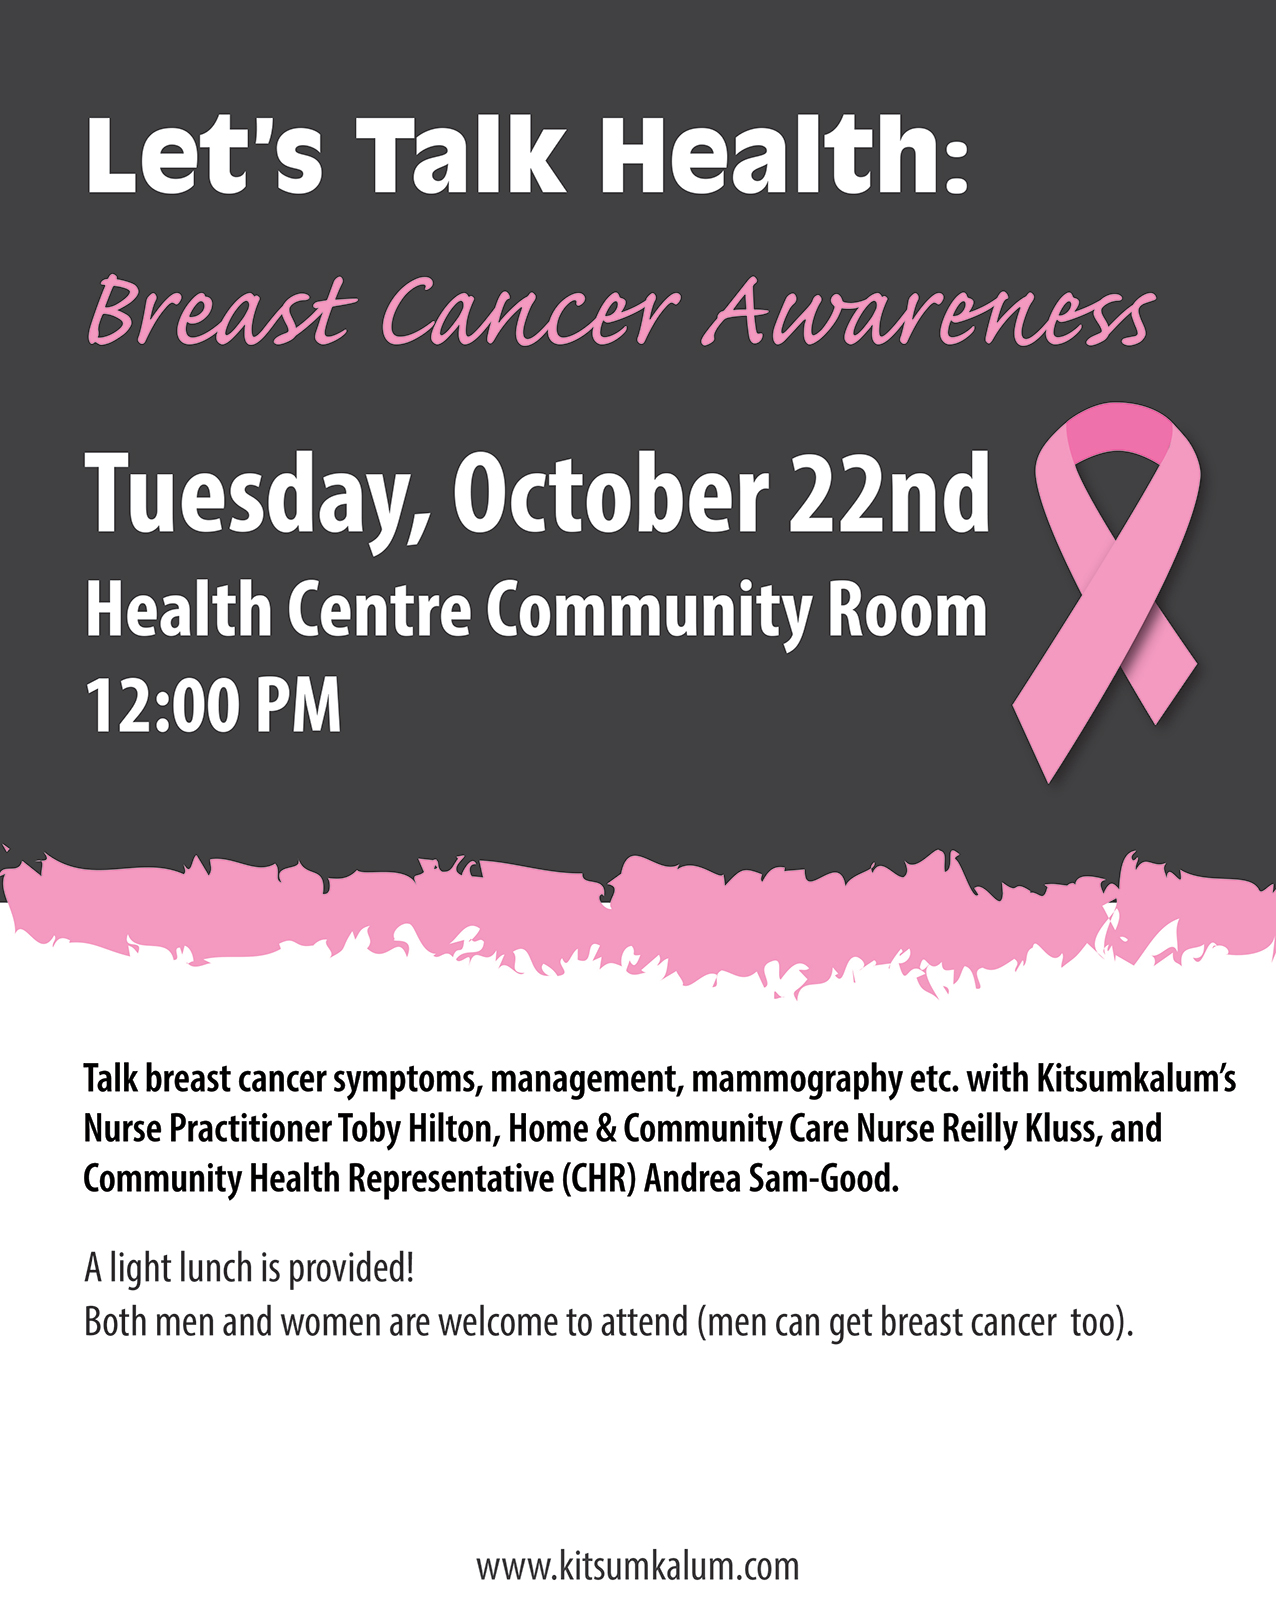 Let’s Talk Health: Breast Cancer Awareness OCT 22